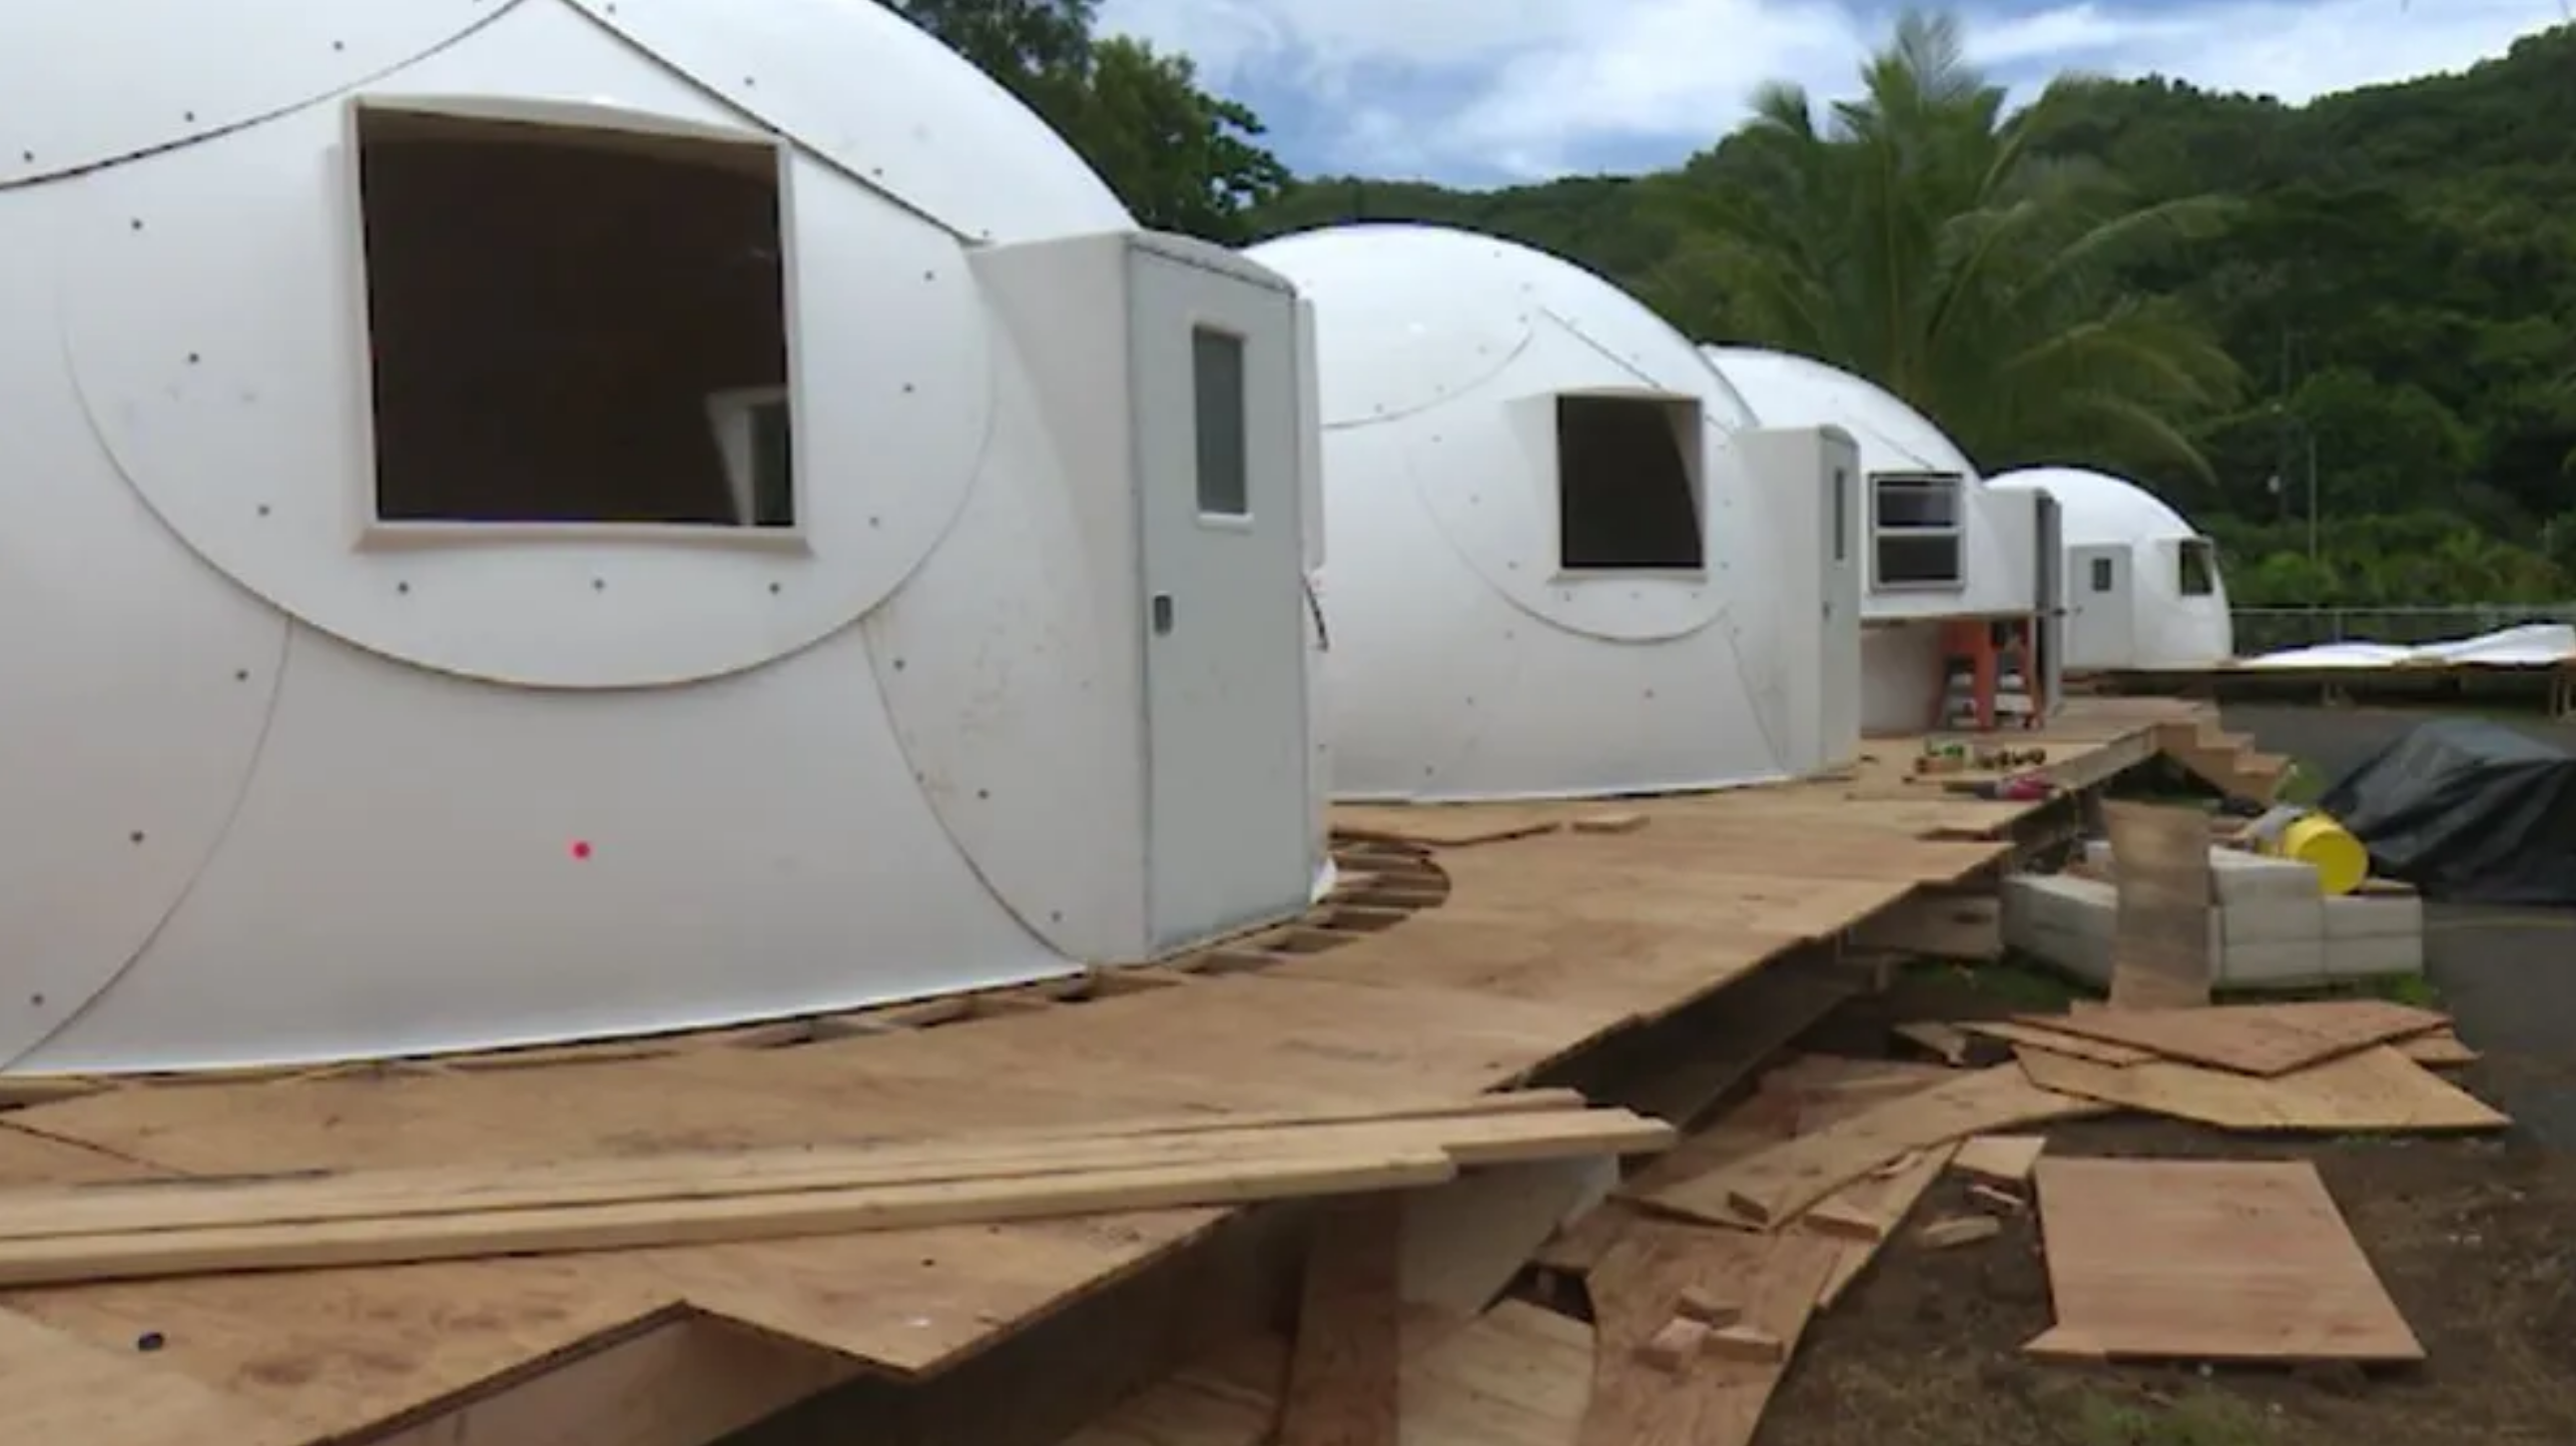 The state’s first igloo dome shelters open to help Hawaii’s homeless